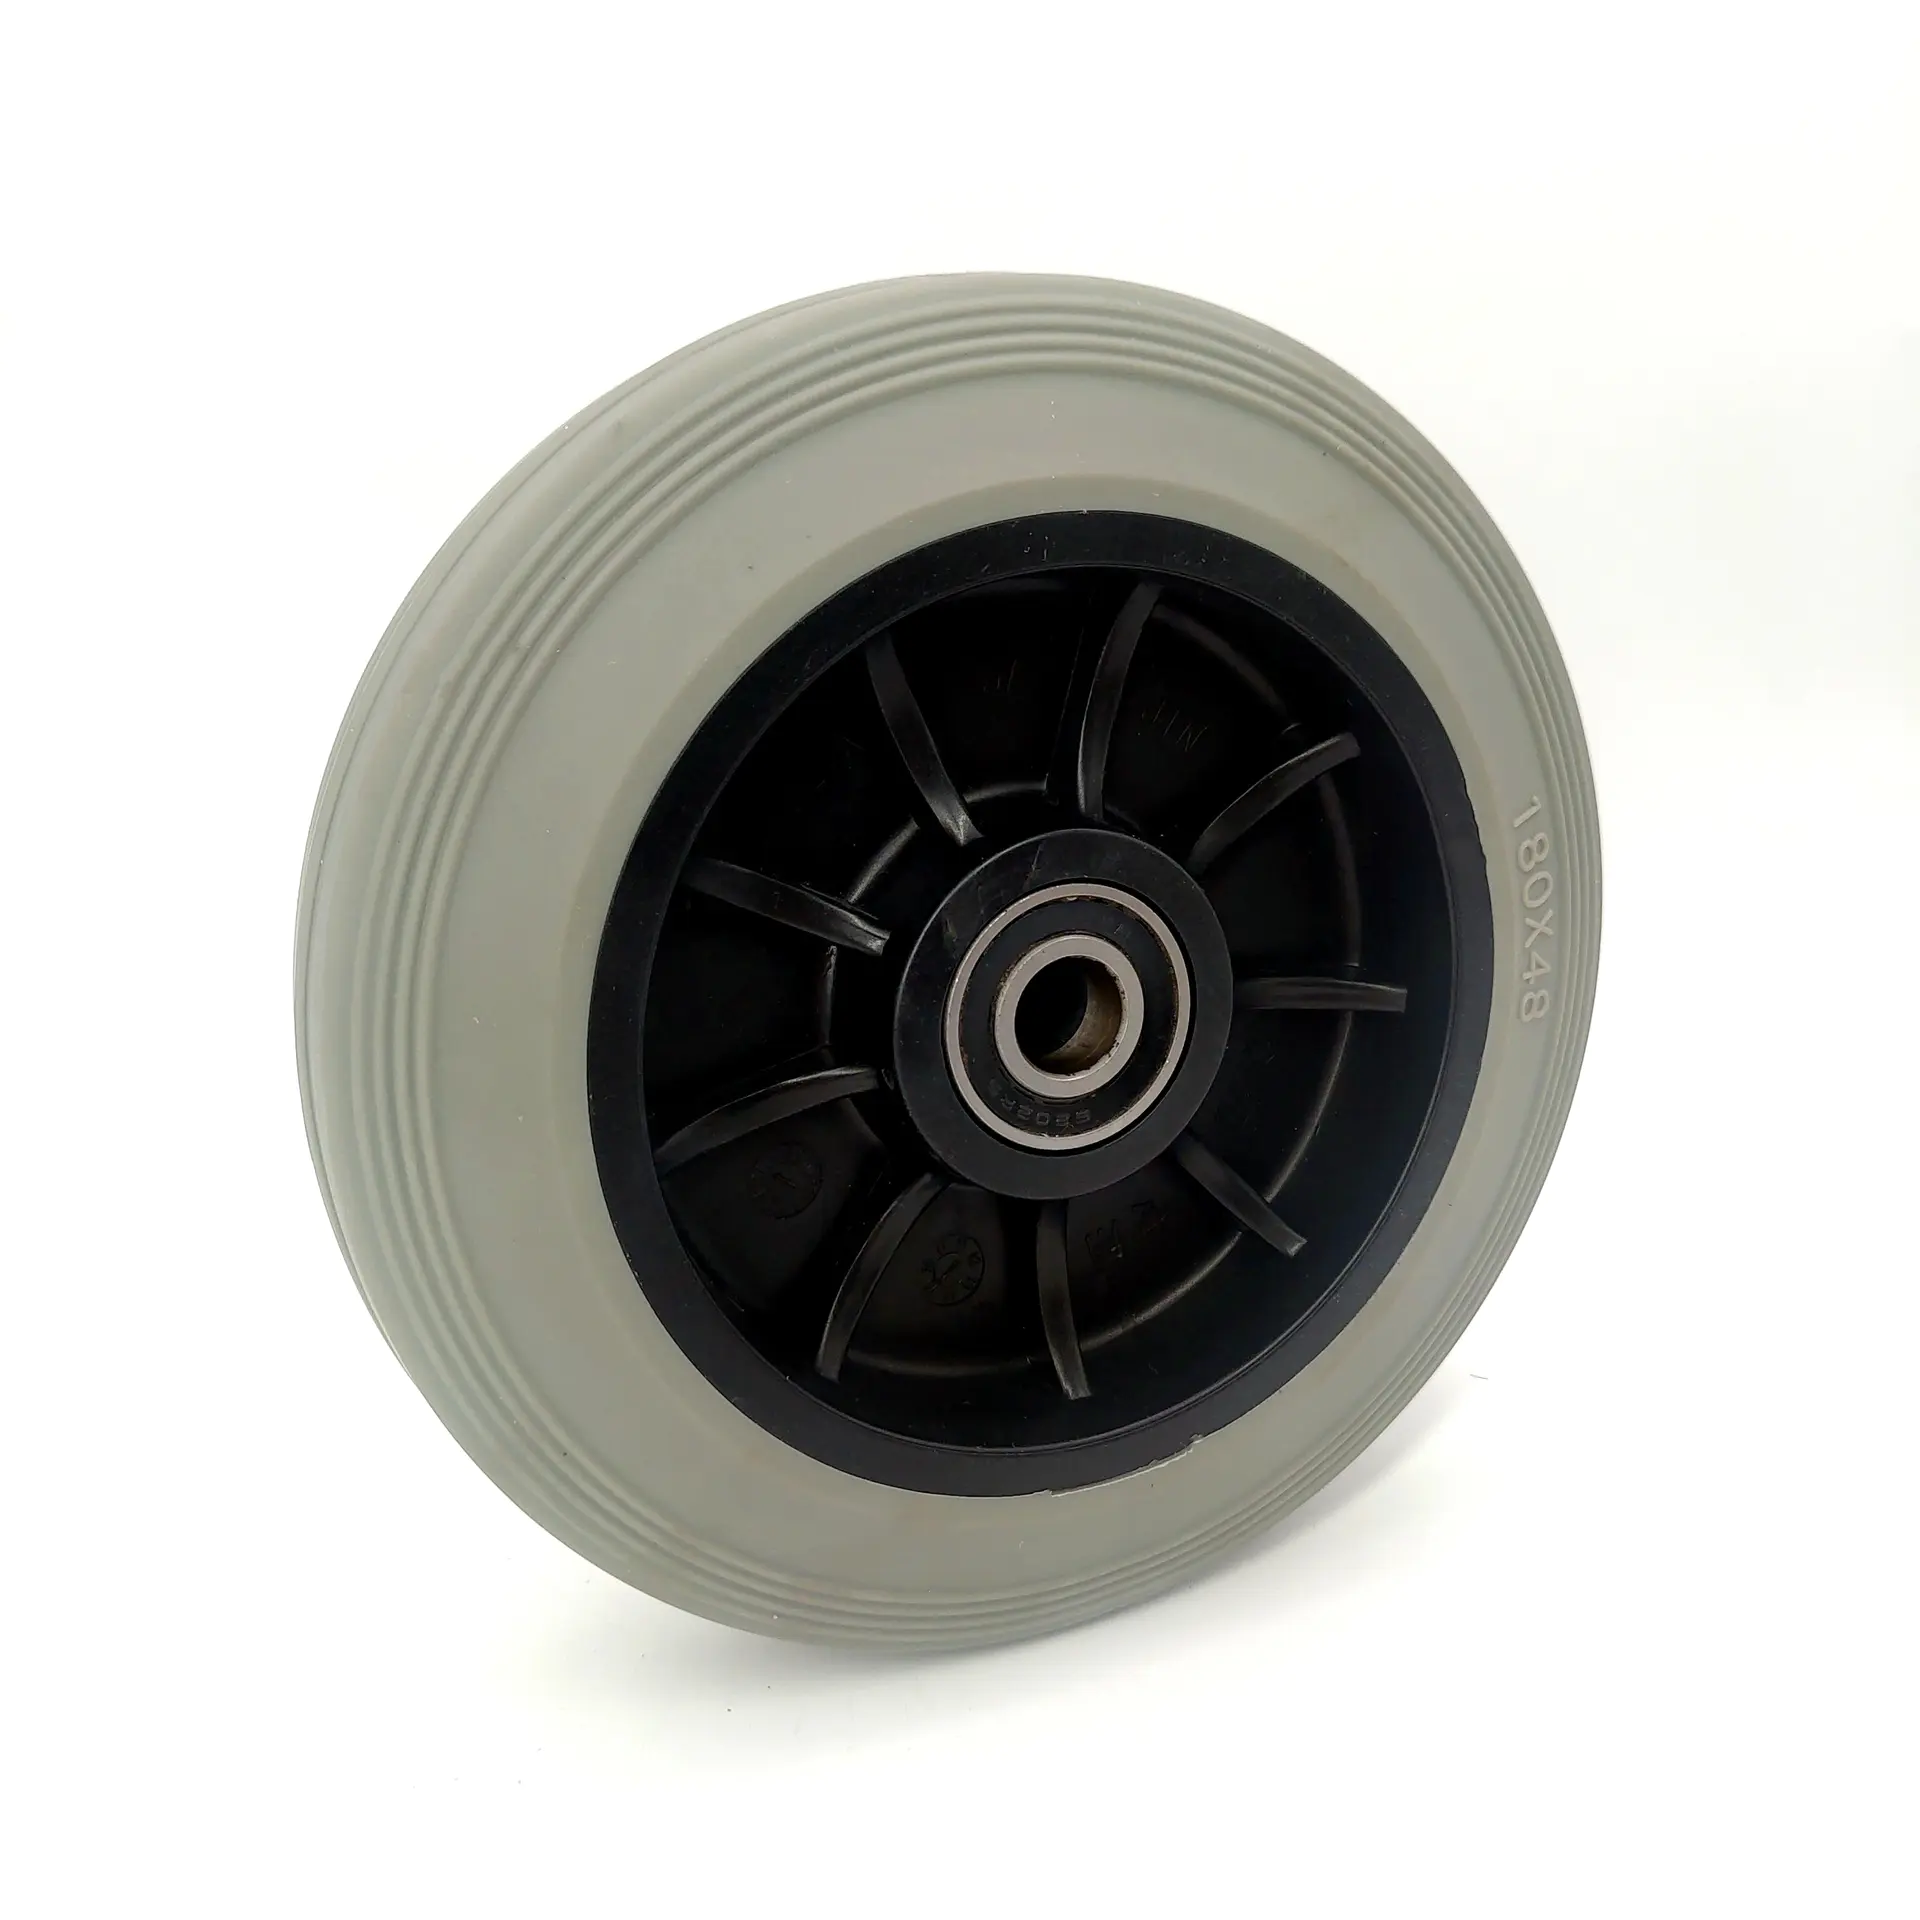 Noiseless 7 inch Thermoplastic rubber caster wheel